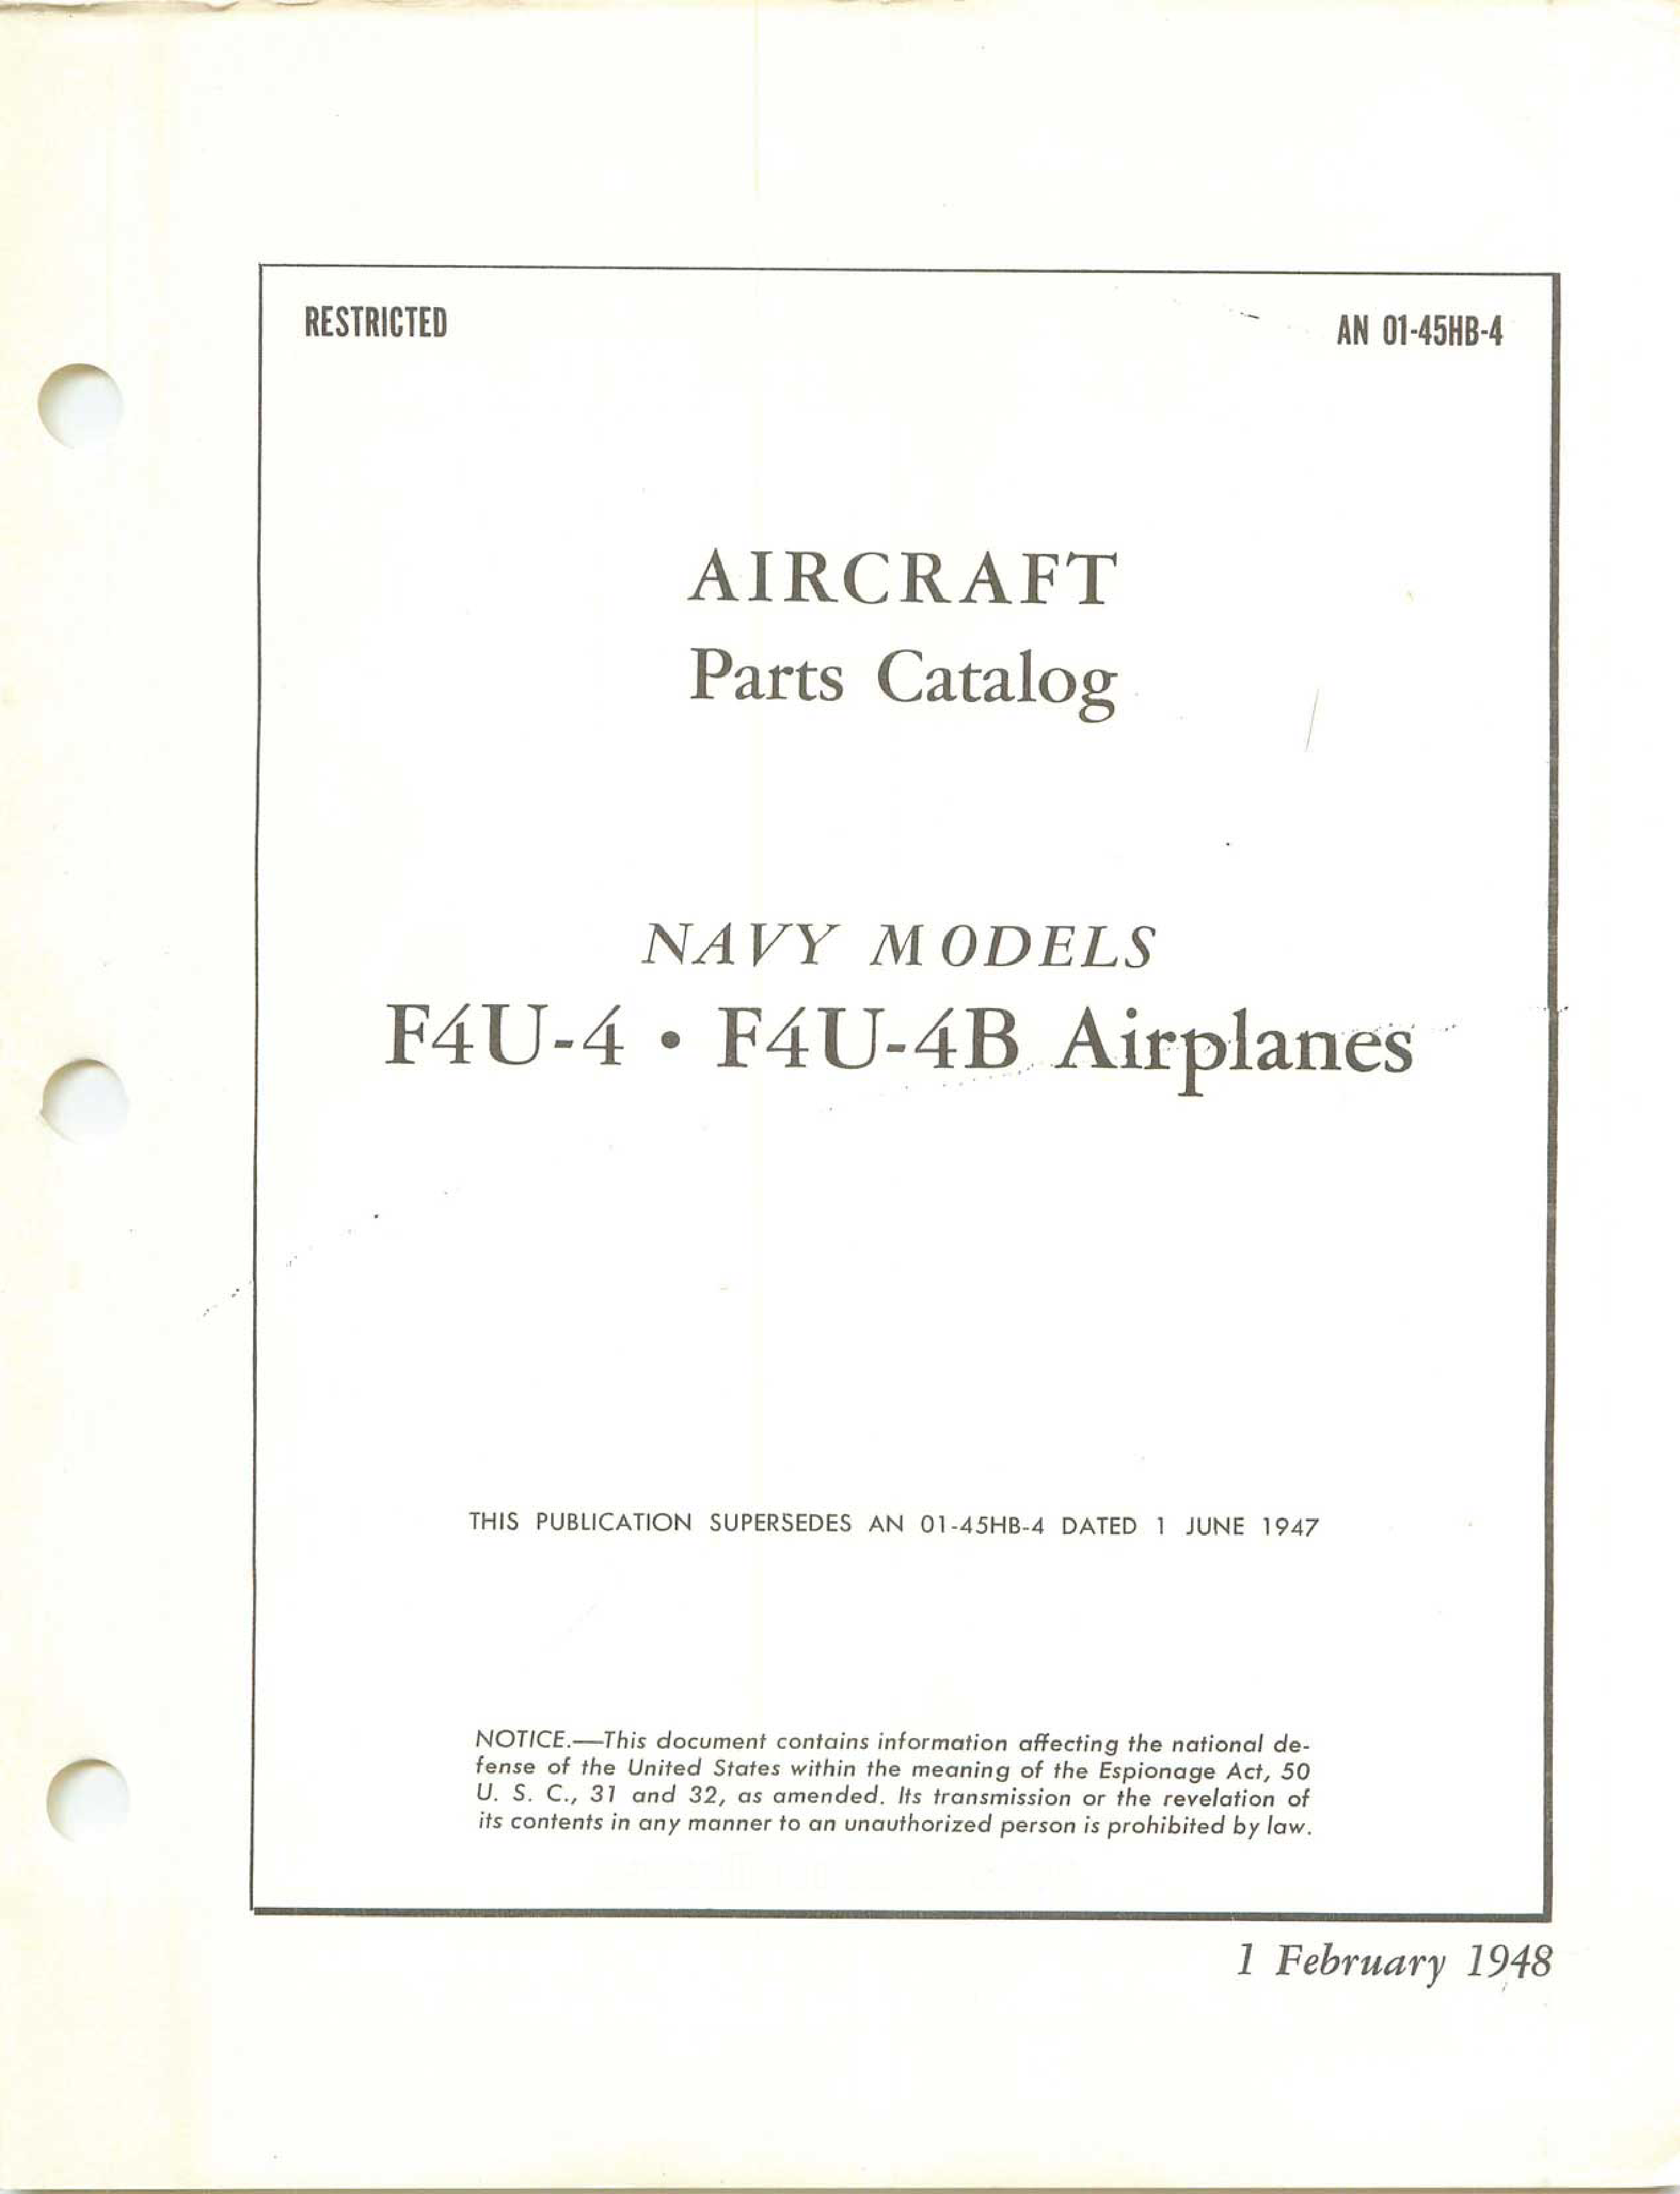 Sample page 1 from AirCorps Library document: Parts Catalog for F4U-4 and F4U-4B Airplanes